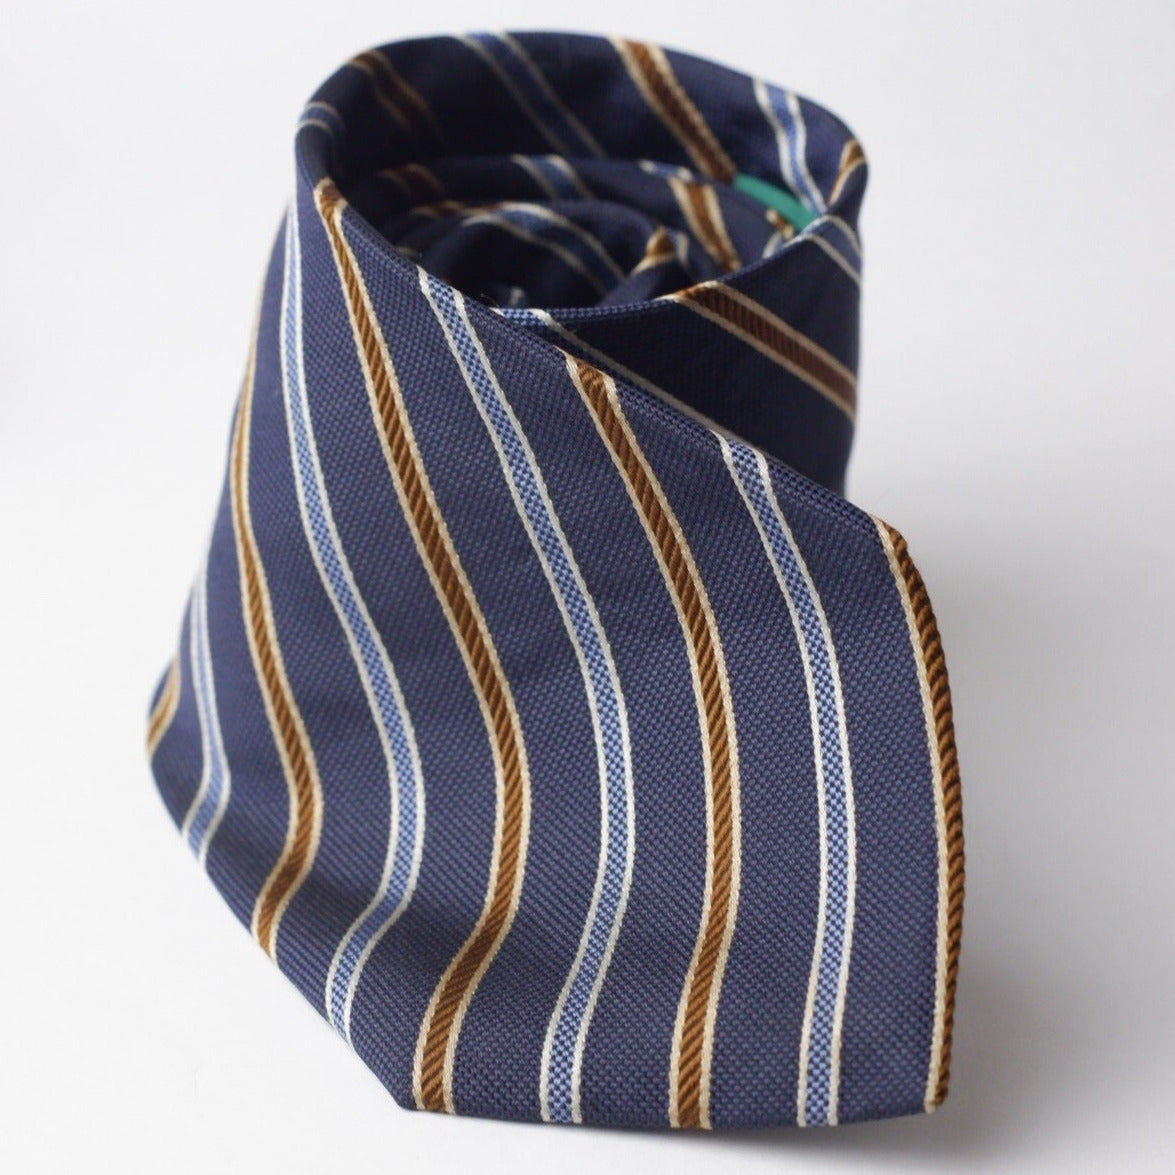 Andrew's Ties Blue with Light Blue and Gold Stripes Necktie